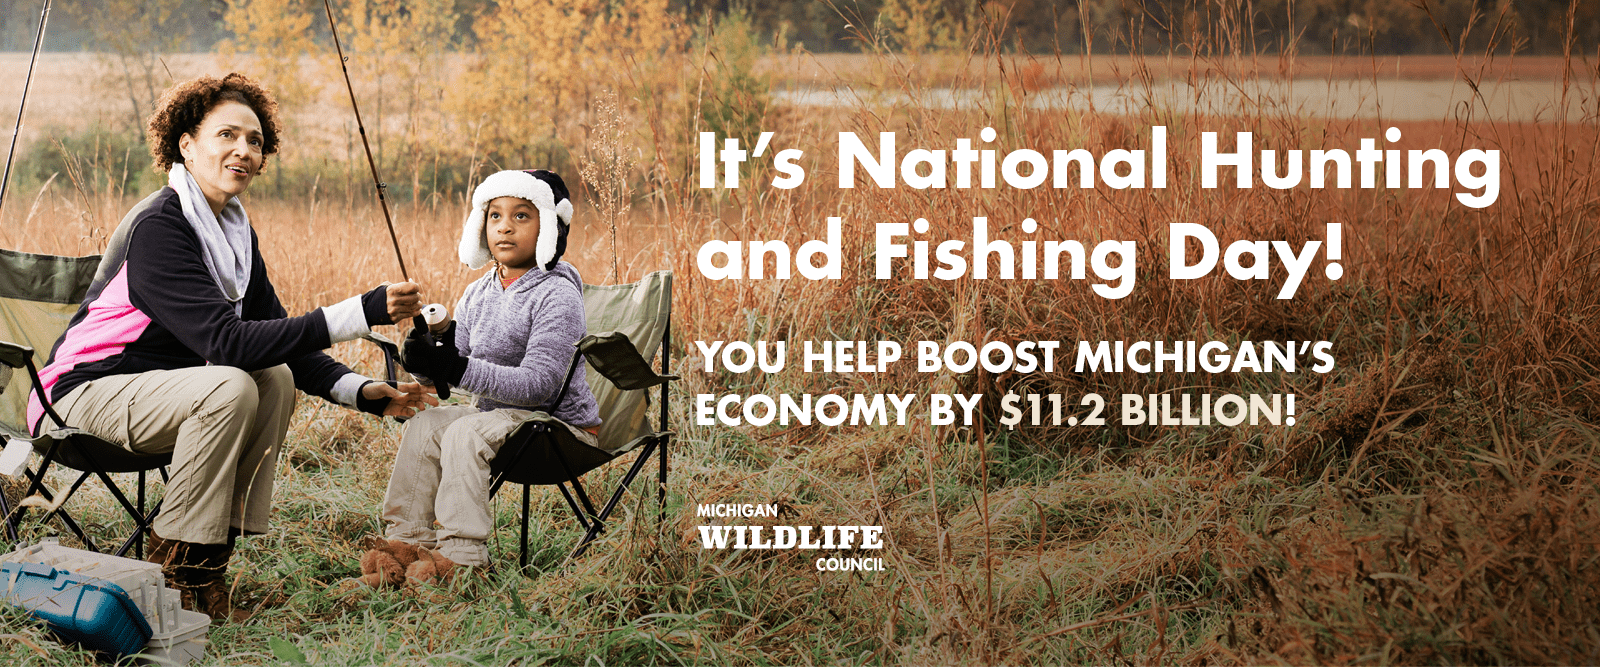 National Hunting and Fishing Day - Michigan Wildlife Council